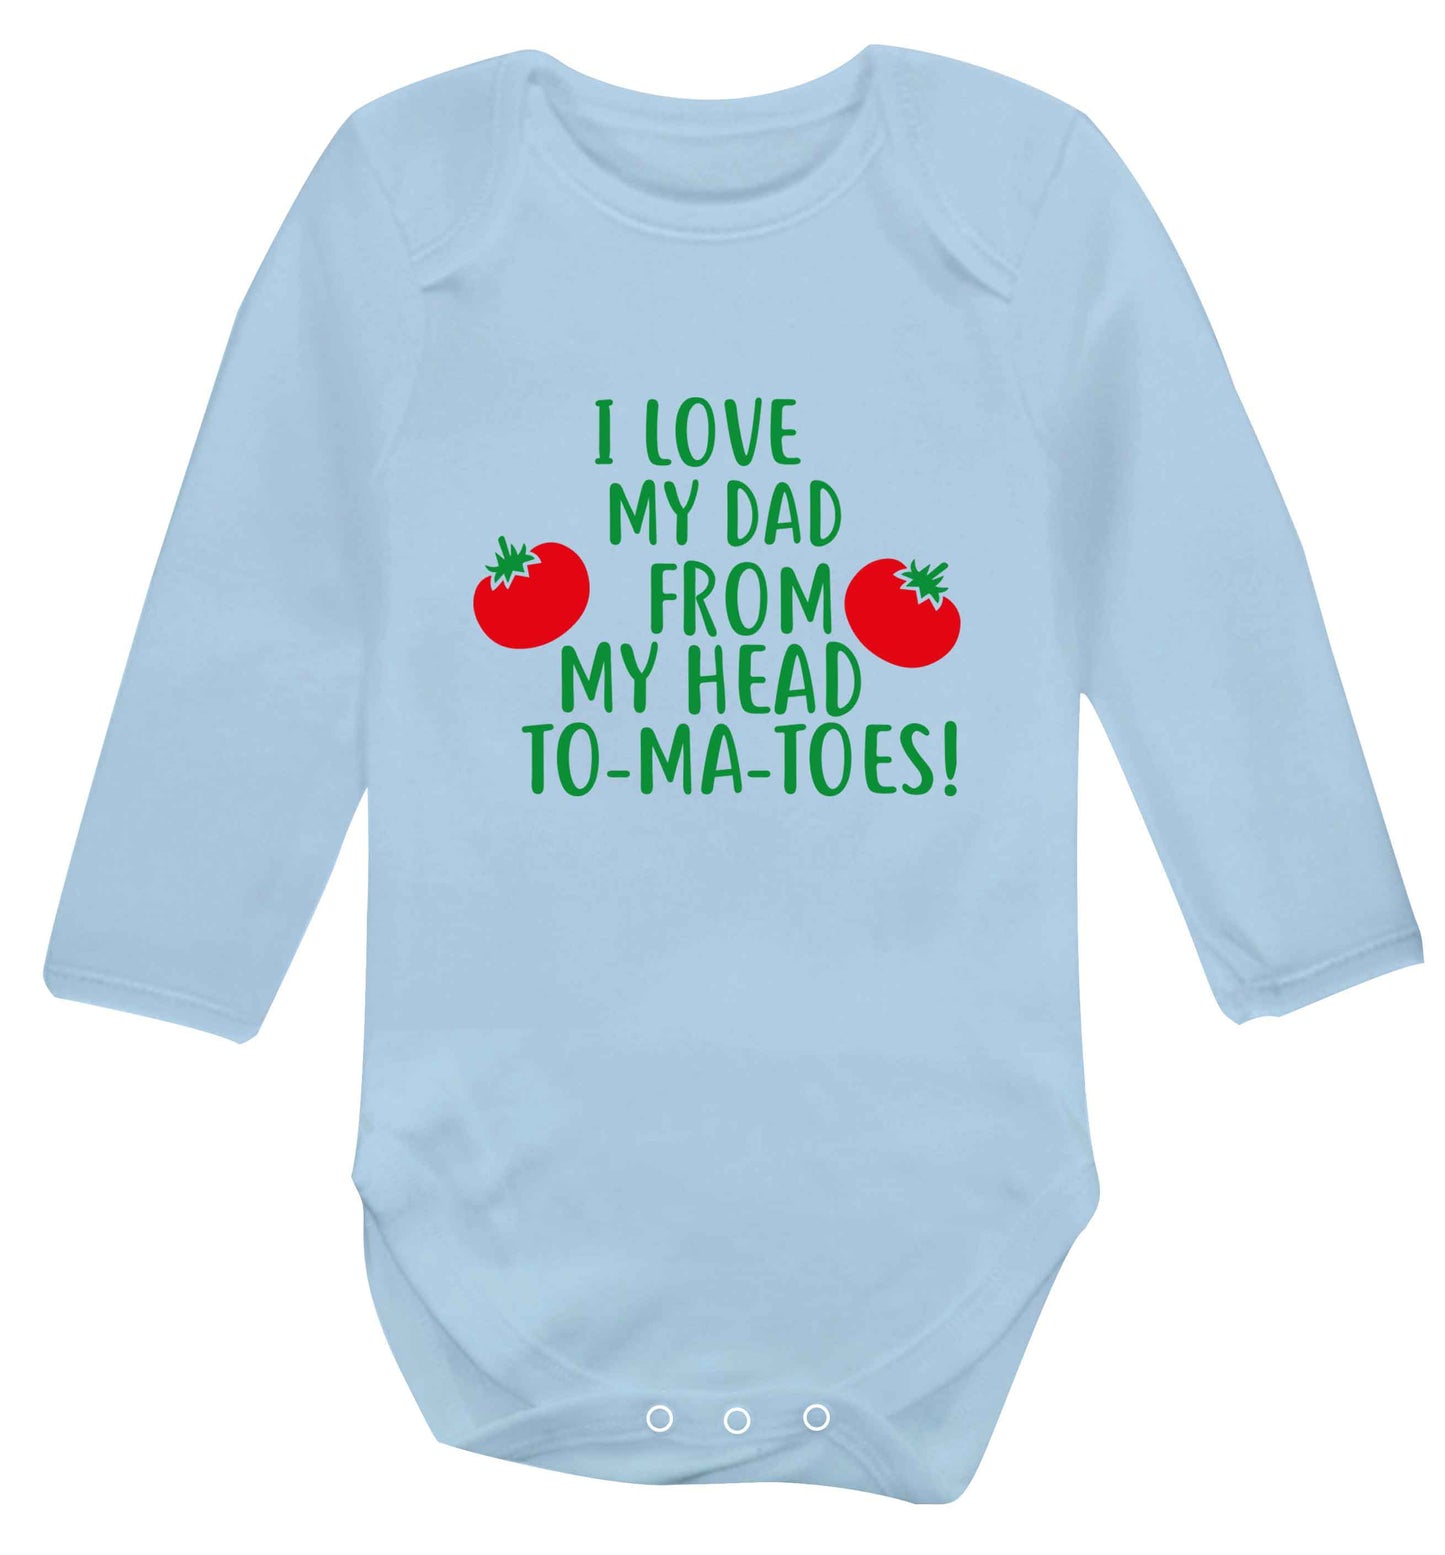 I love my dad from my head to-ma-toes baby vest long sleeved pale blue 6-12 months